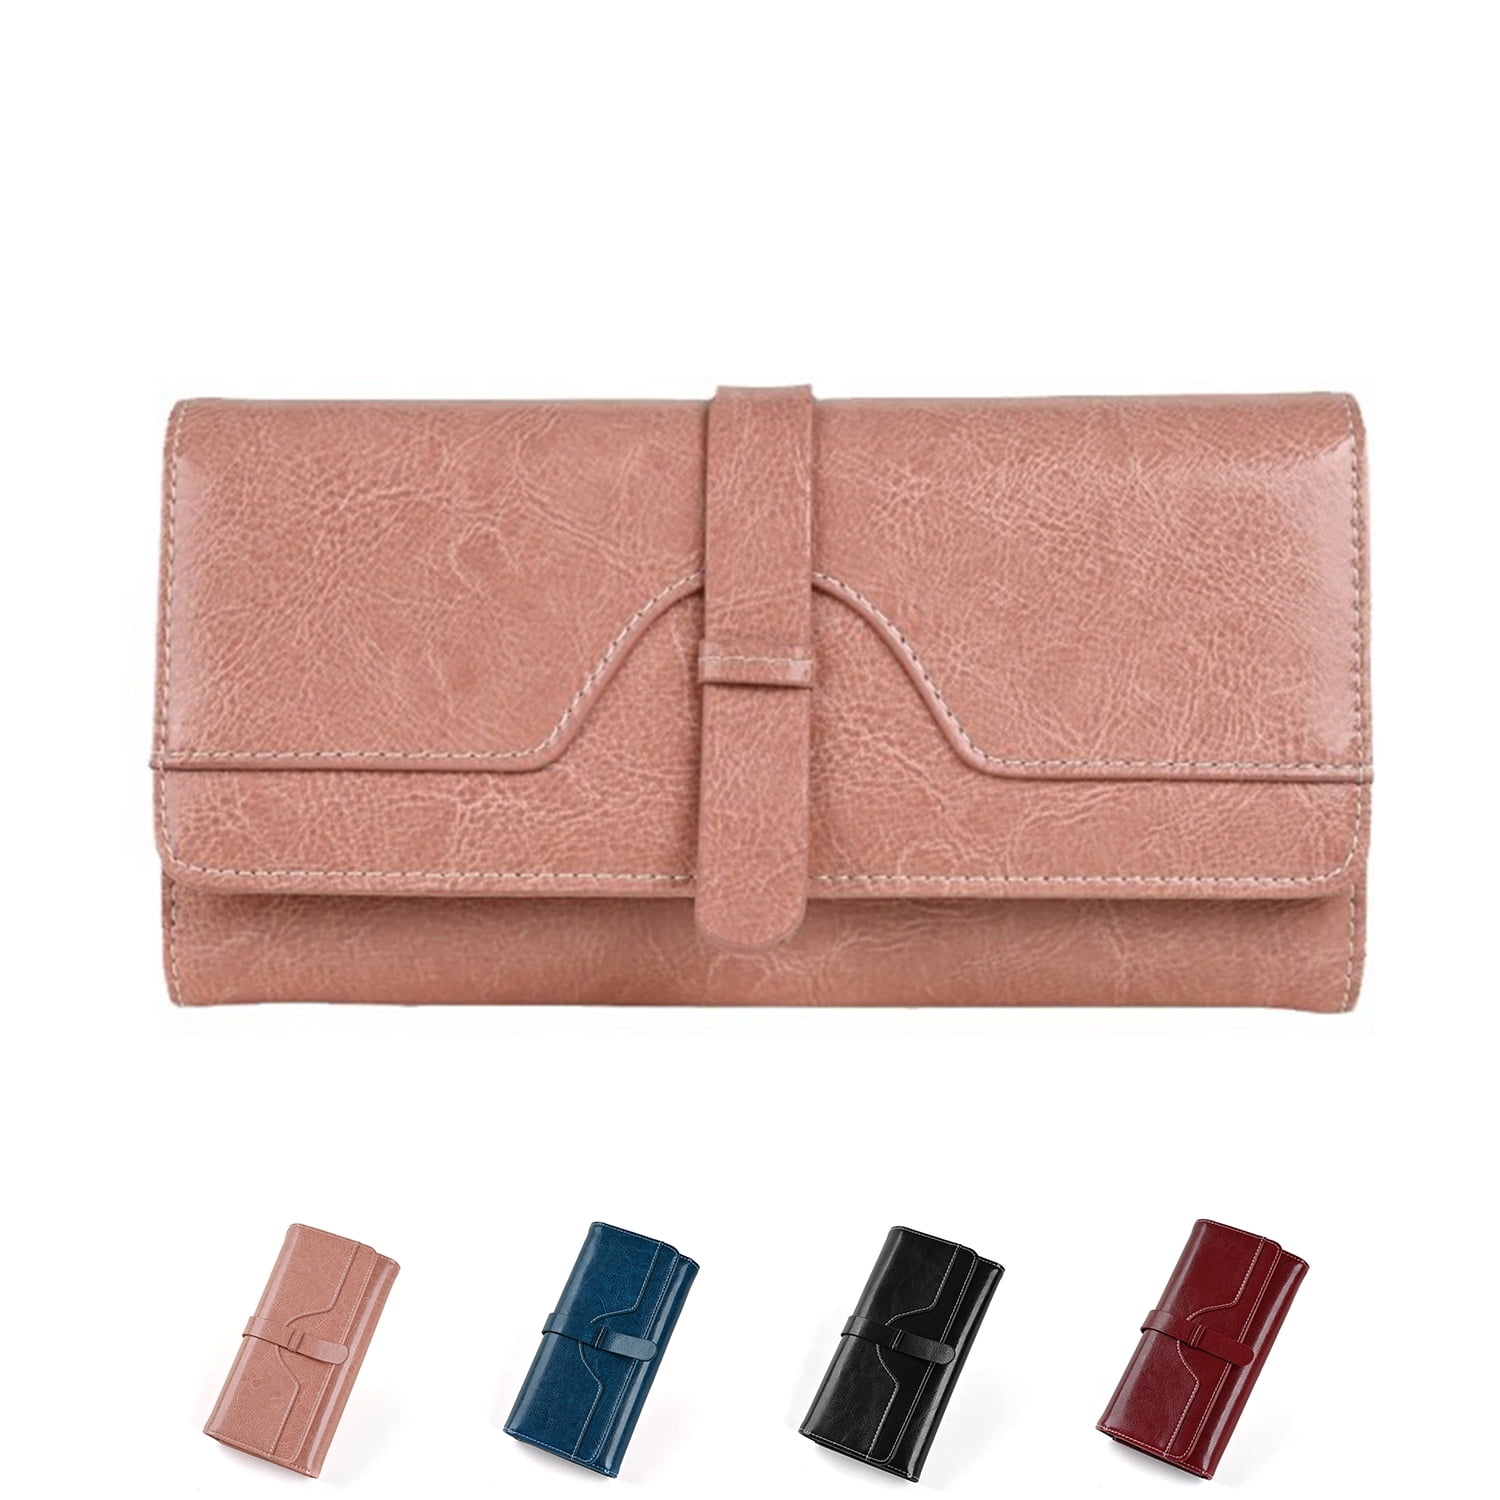 Gzcz Genuine Leather Women's Mini Wallet Quality Small Coin Purse Rfid  Blocking Protection Card Holder Girls Vollets With Pocket - Coin Purses -  AliExpress